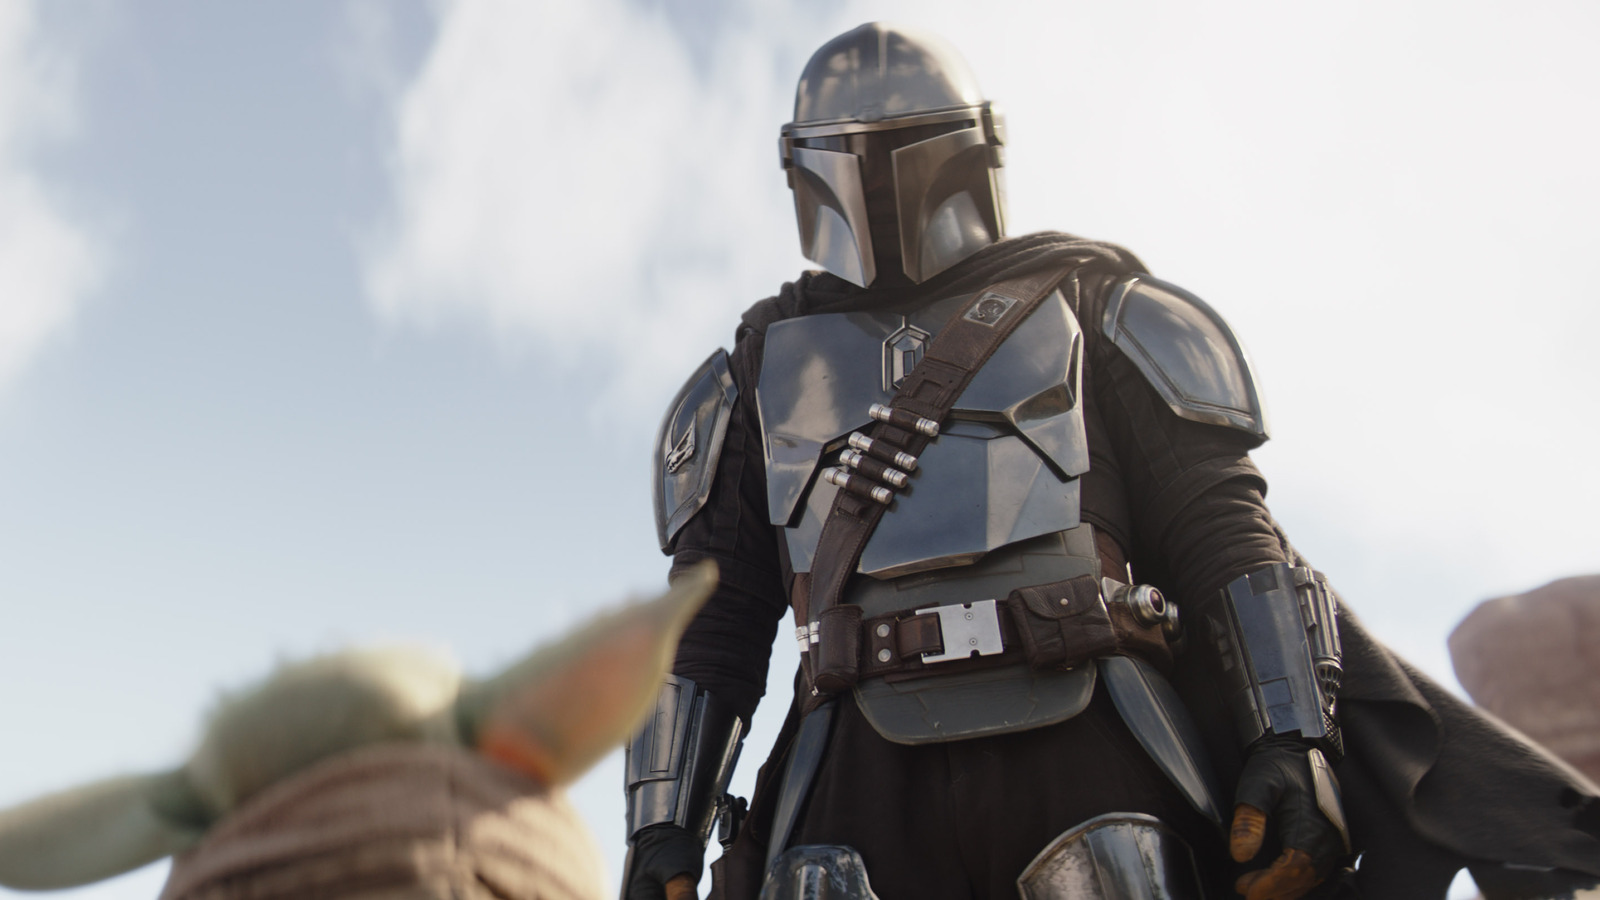 Star Wars: The Mandalorian: The Complete First Season 4K, Blu-Ray Review   .